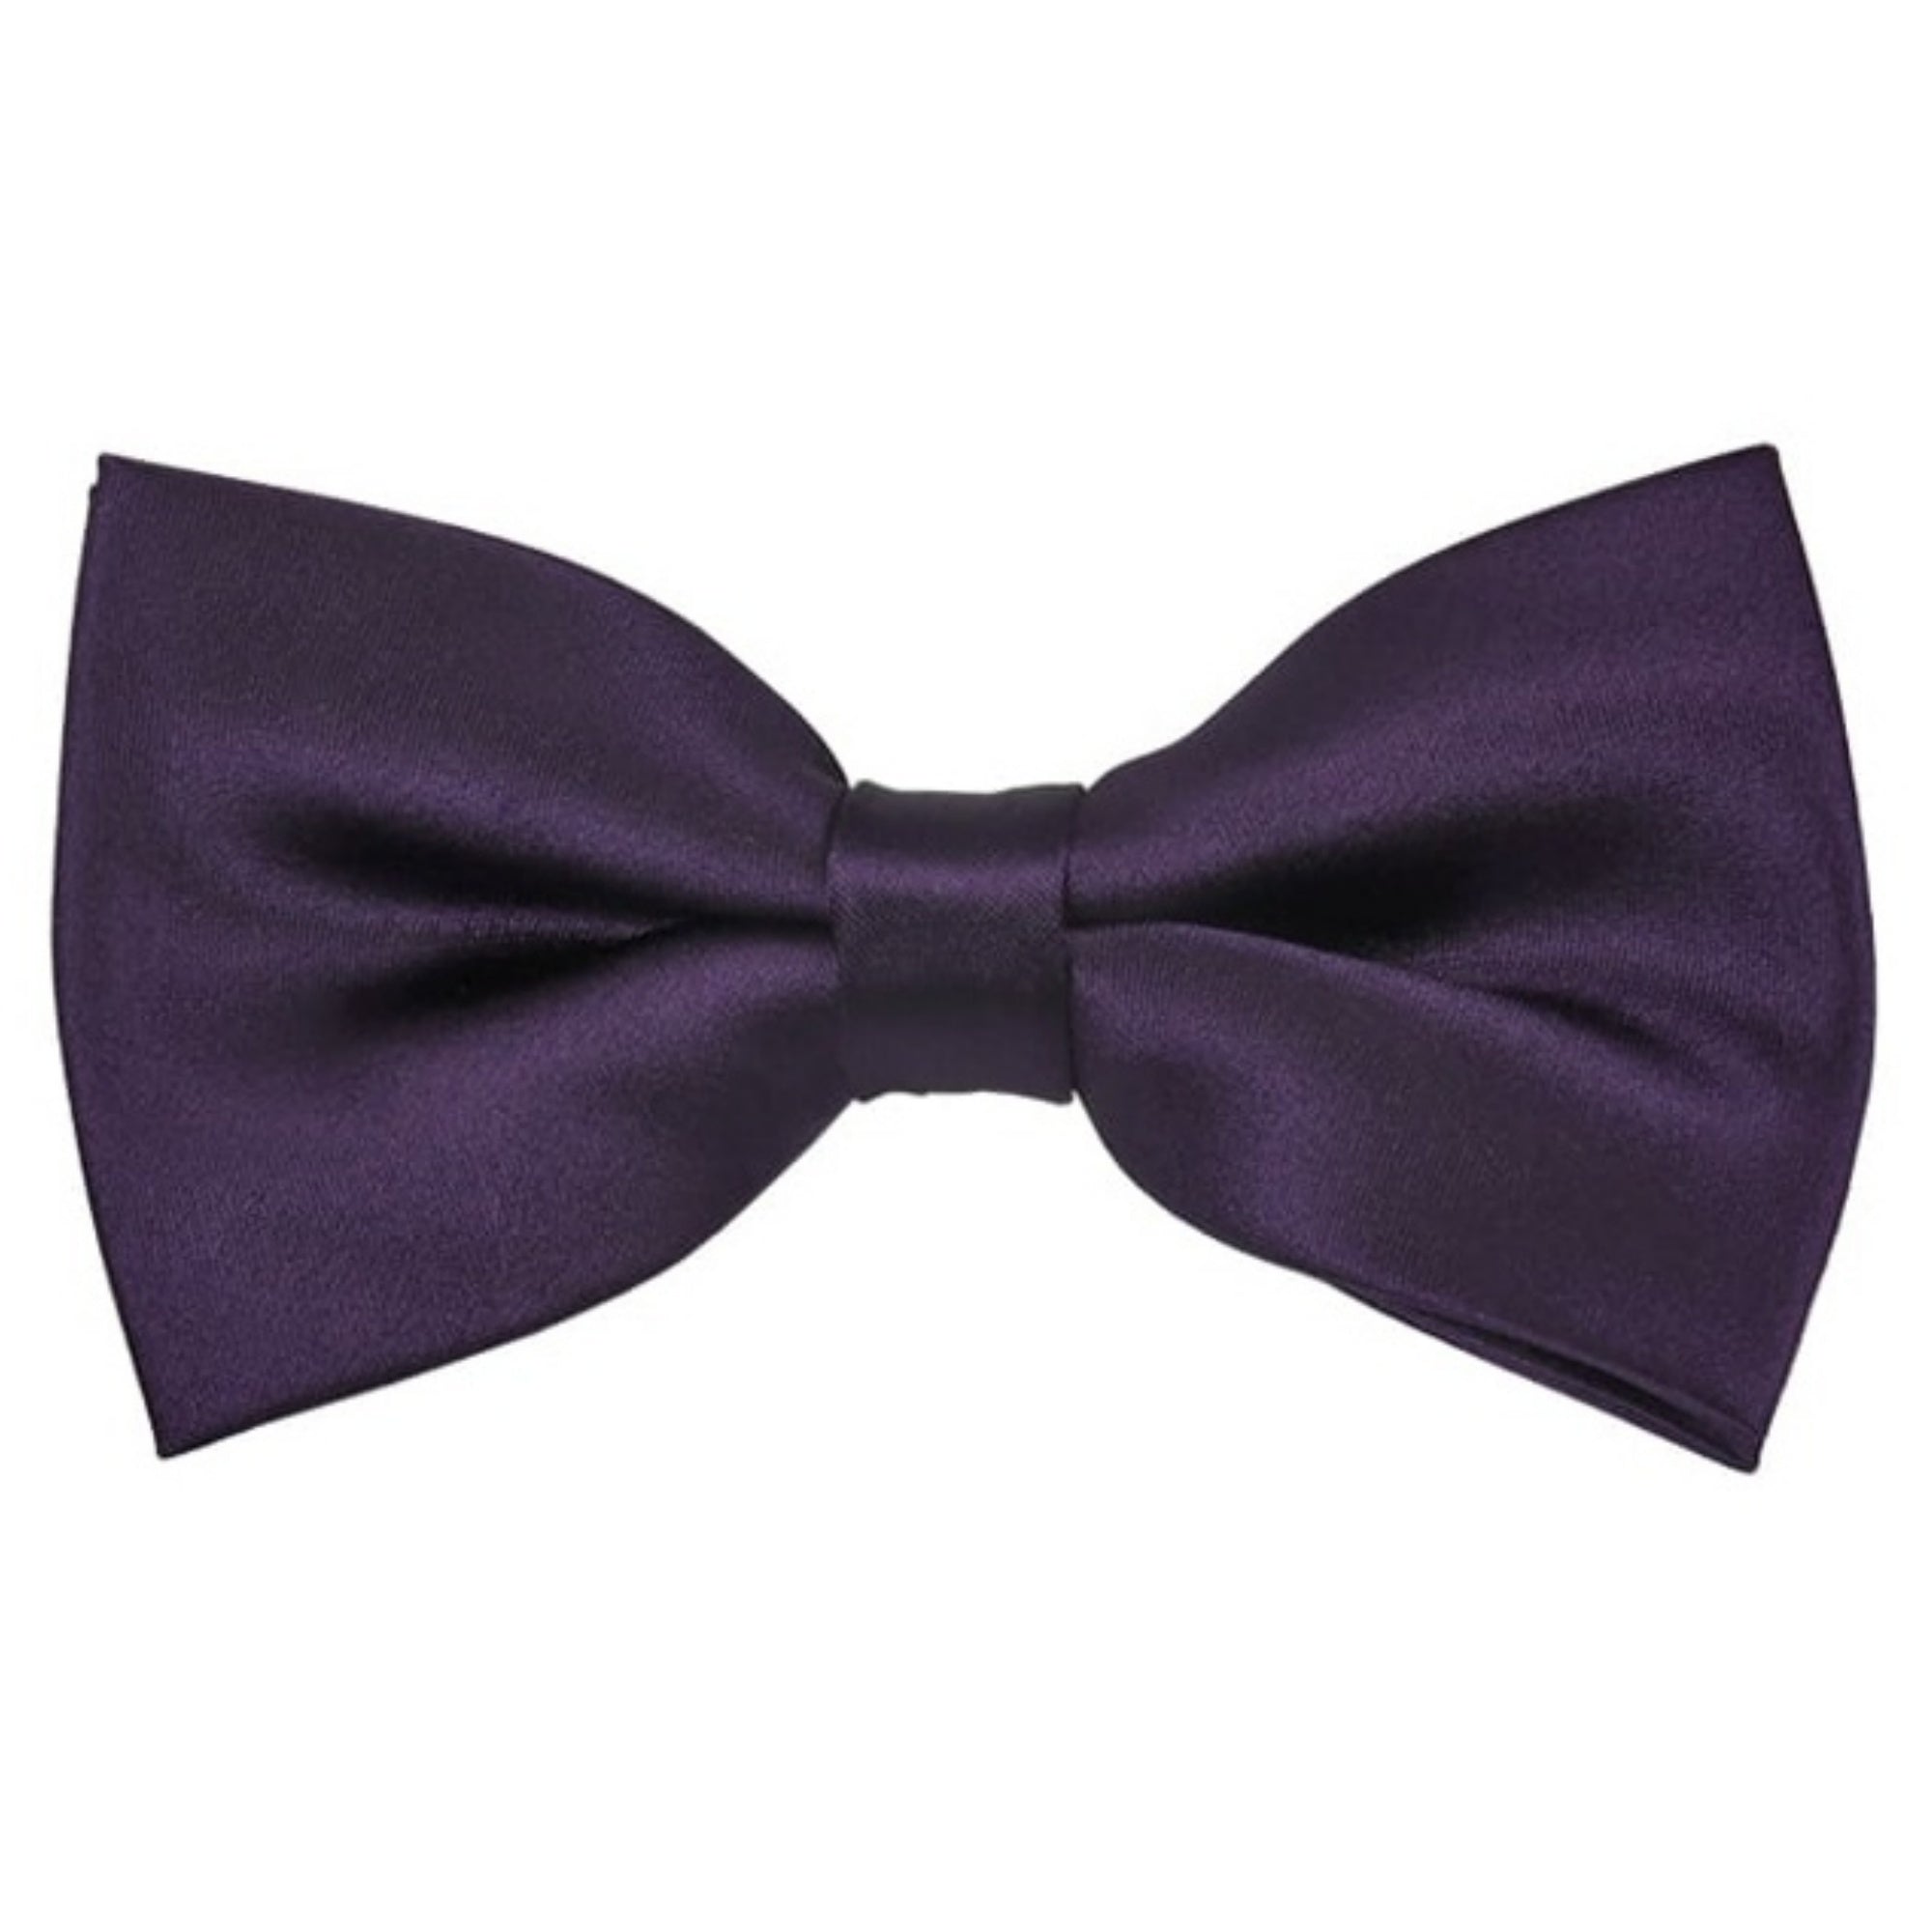 TheDapperTie Men's Solid Color 2.5 W And 4.5 L Inch Pre-Tied adjustable Bow Ties Men's Solid Color Bow Tie TheDapperTie Eggplant  